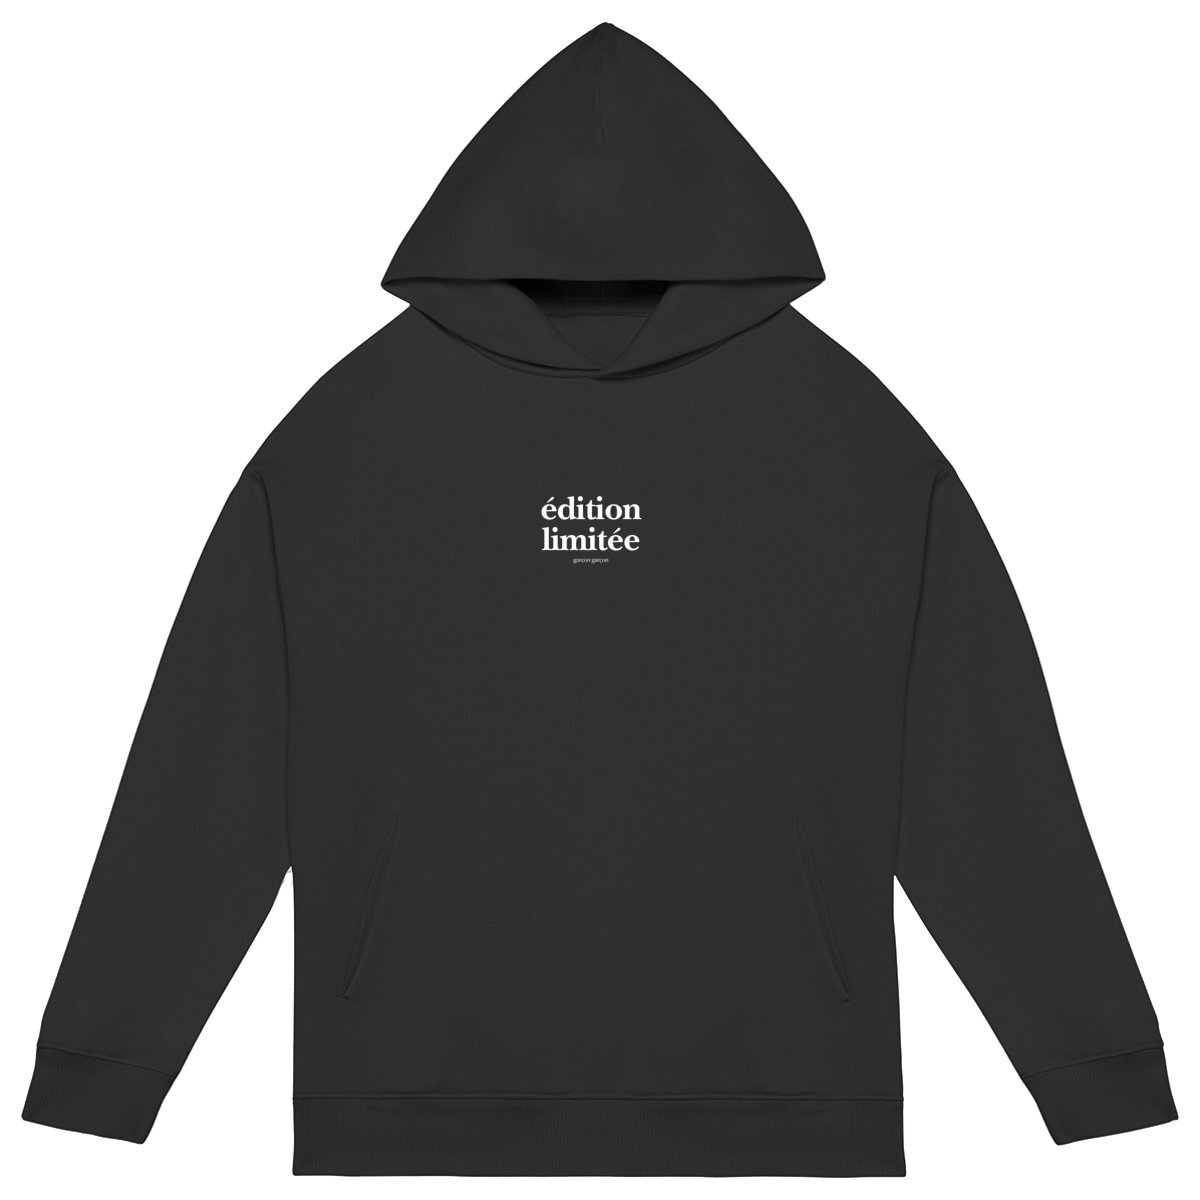 edition limitée  hoodie oversized. garçon garçon essentiel oversized hoodie. Sleek in black and whispering Parisian chic, this hoodie is the sartorial whisper of 'garçon garçon' — a statement of understated elegance. Perfect for those who carry a piece of Paris in their hearts and a touch of audacity on their sleeves.